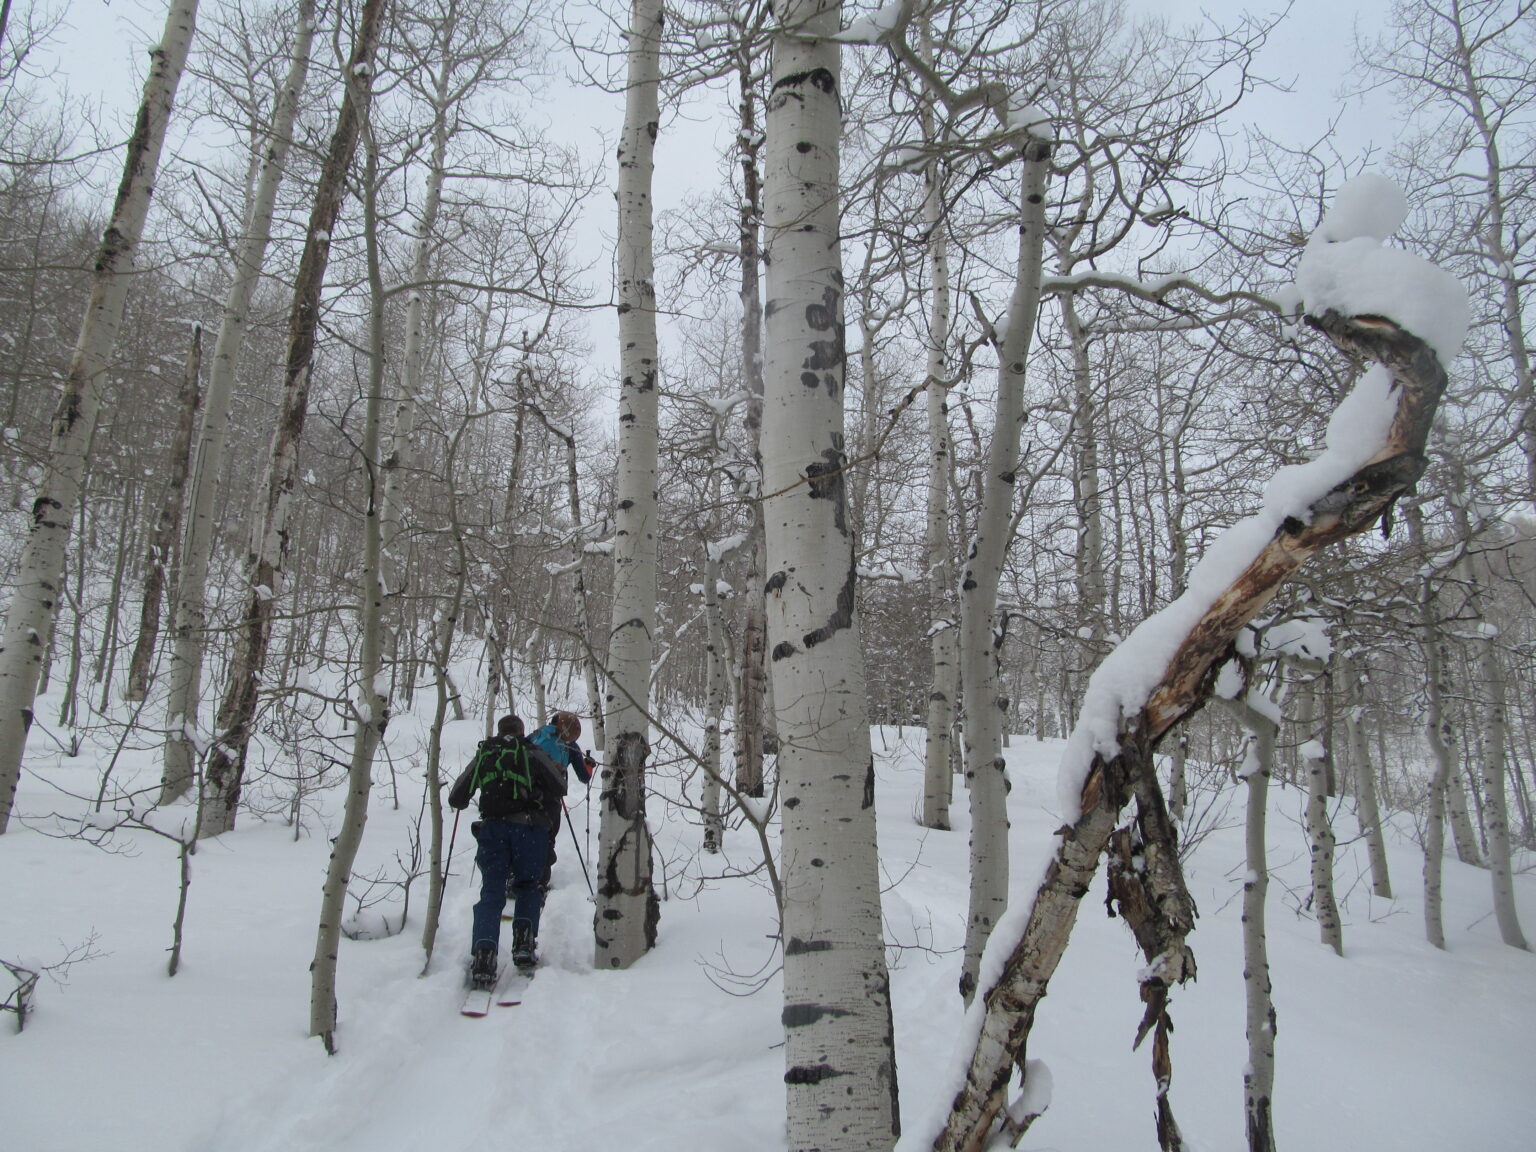 Ski touring up Butler Fork in the Wasatch Backcountry